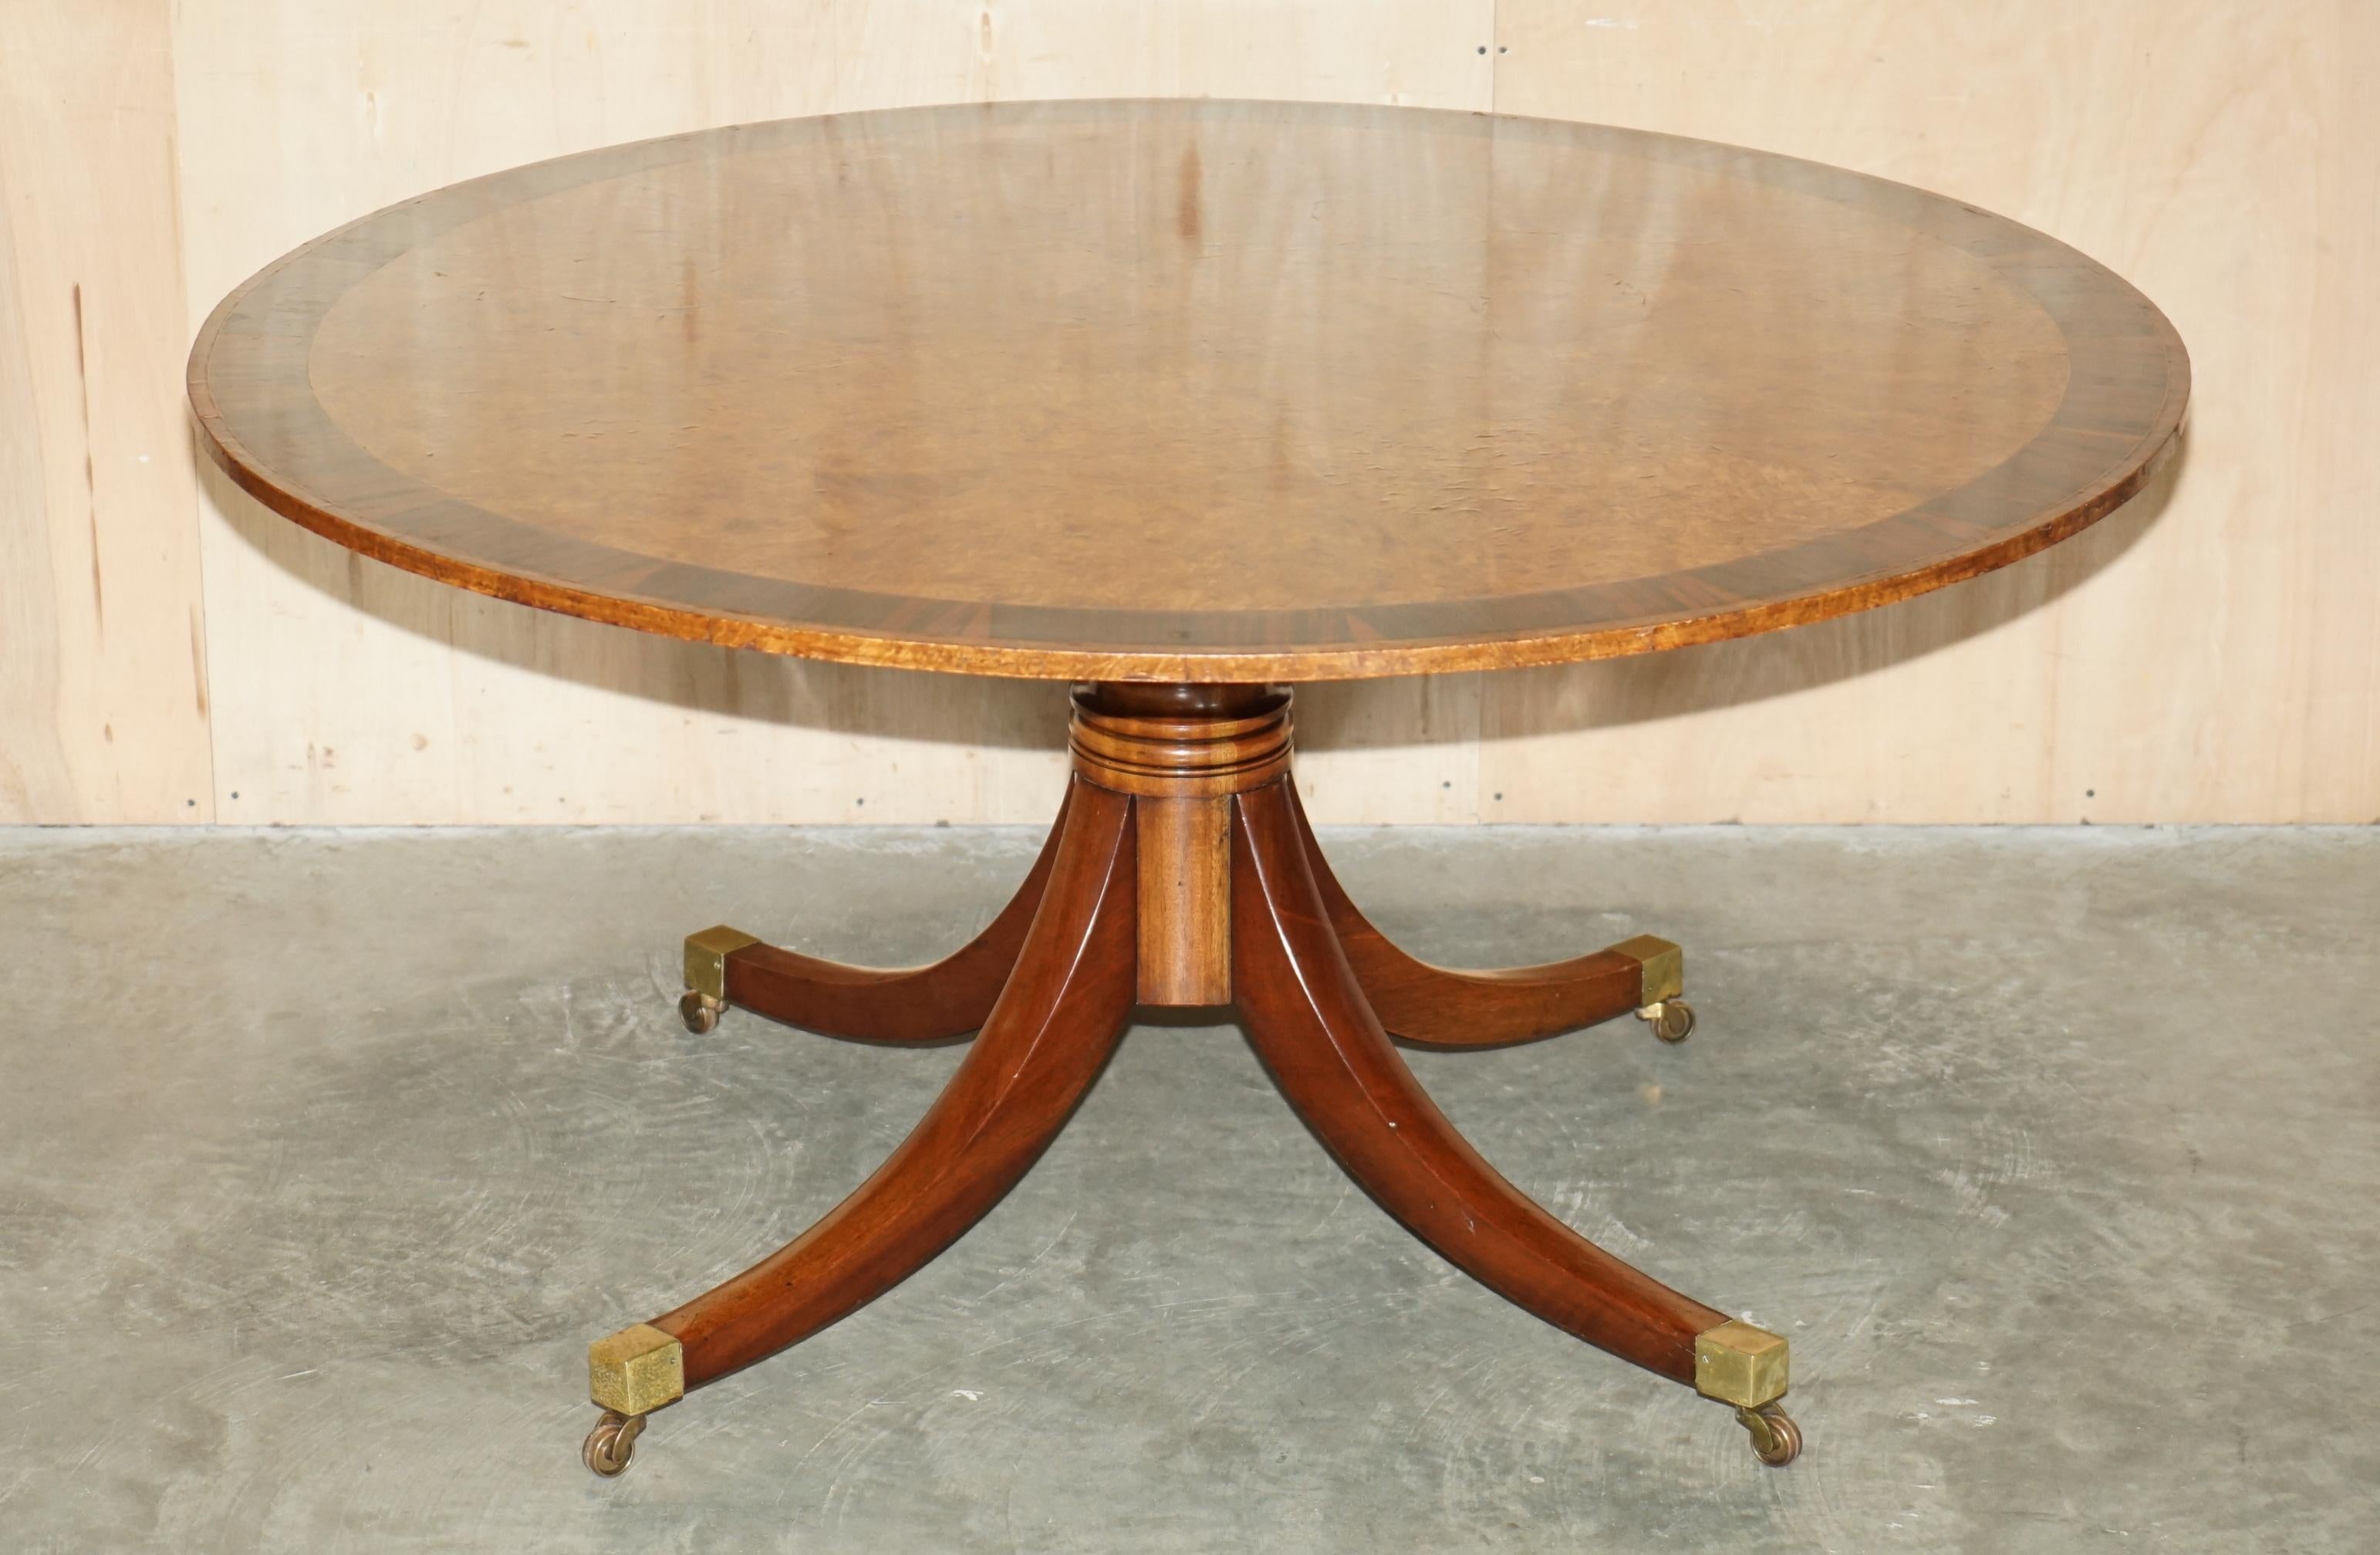 Royal House Antiques

Royal House Antiques is delighted to offer for sale this absolutely exquisite, Regency style, large round dining or huge centre table made with wonderful rich cuts of Burr Walnut bordered with Macassar Ebony 

Please note the